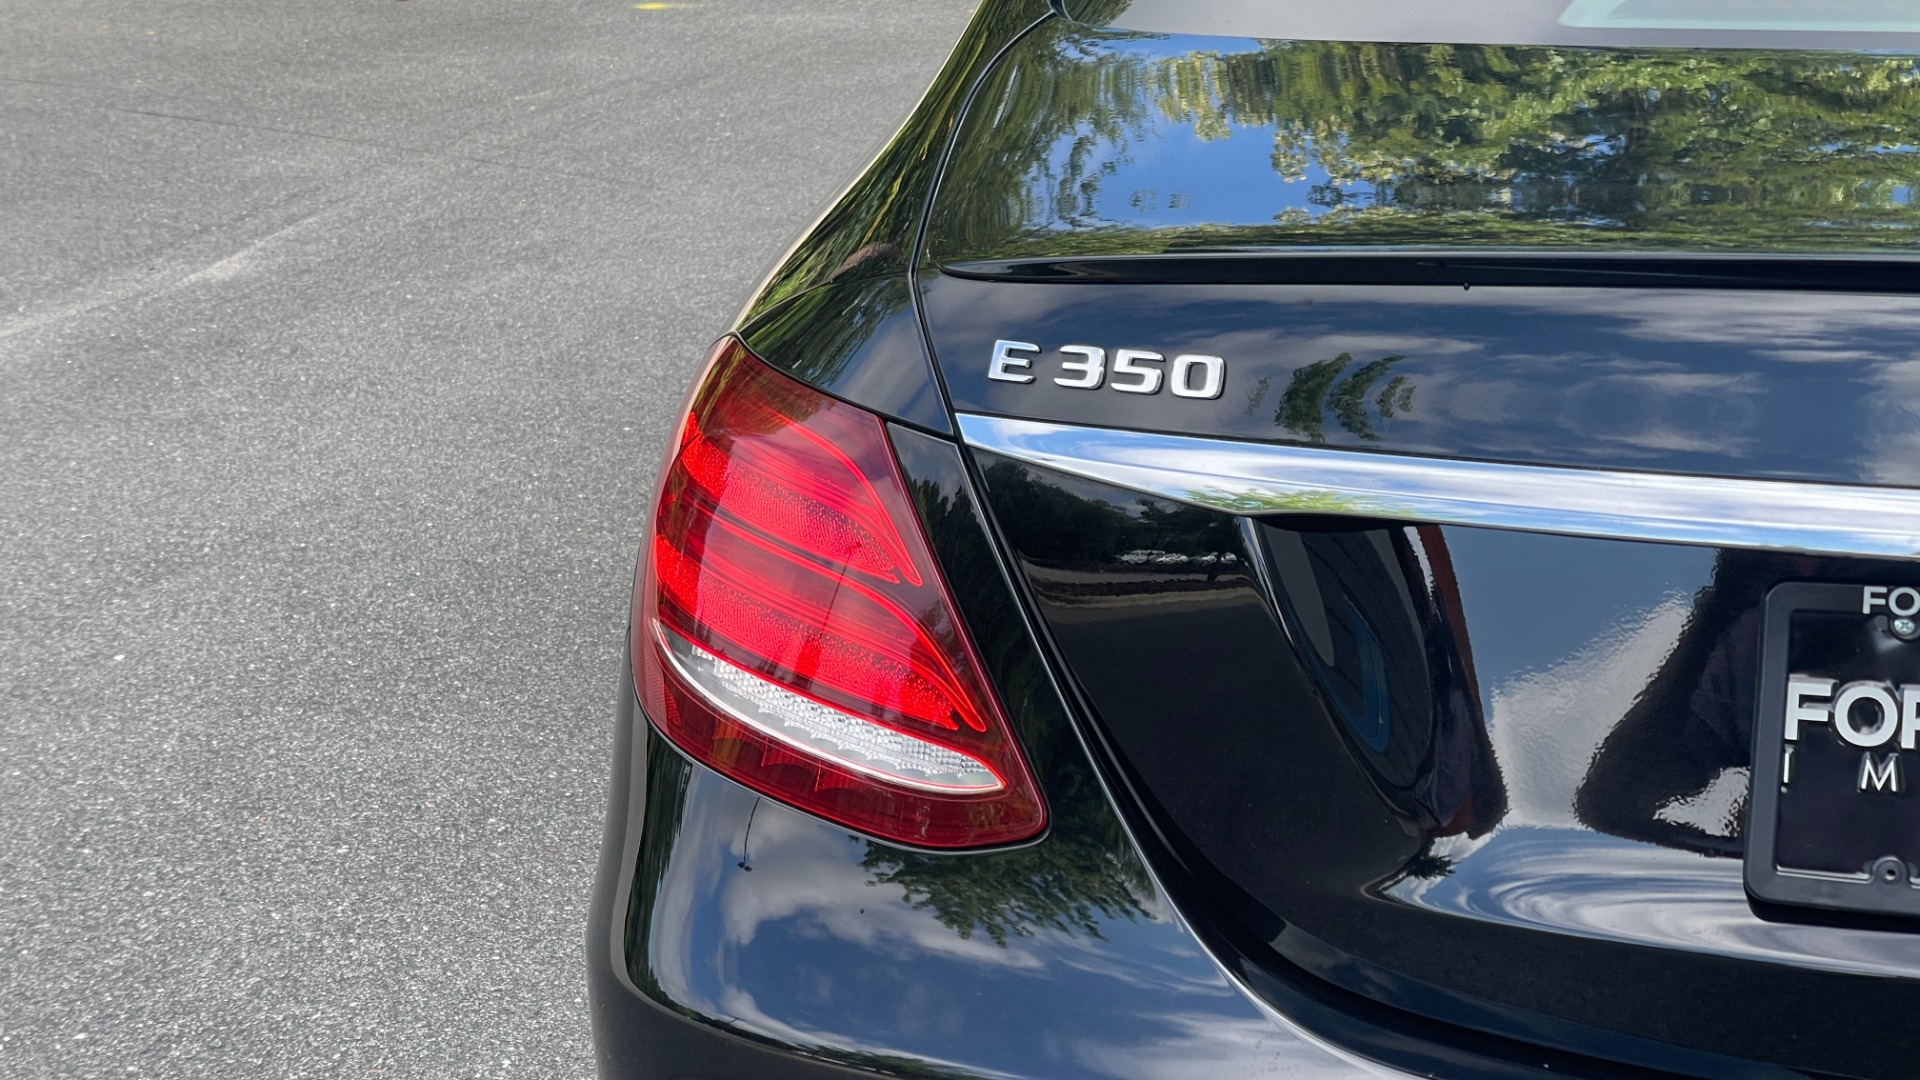 Used 2020 Mercedes-Benz E-Class E 350 / 4MATIC / AMG LINE / BURMESTER SOUND / PANORAMIC ROOF for sale Sold at Formula Imports in Charlotte NC 28227 20